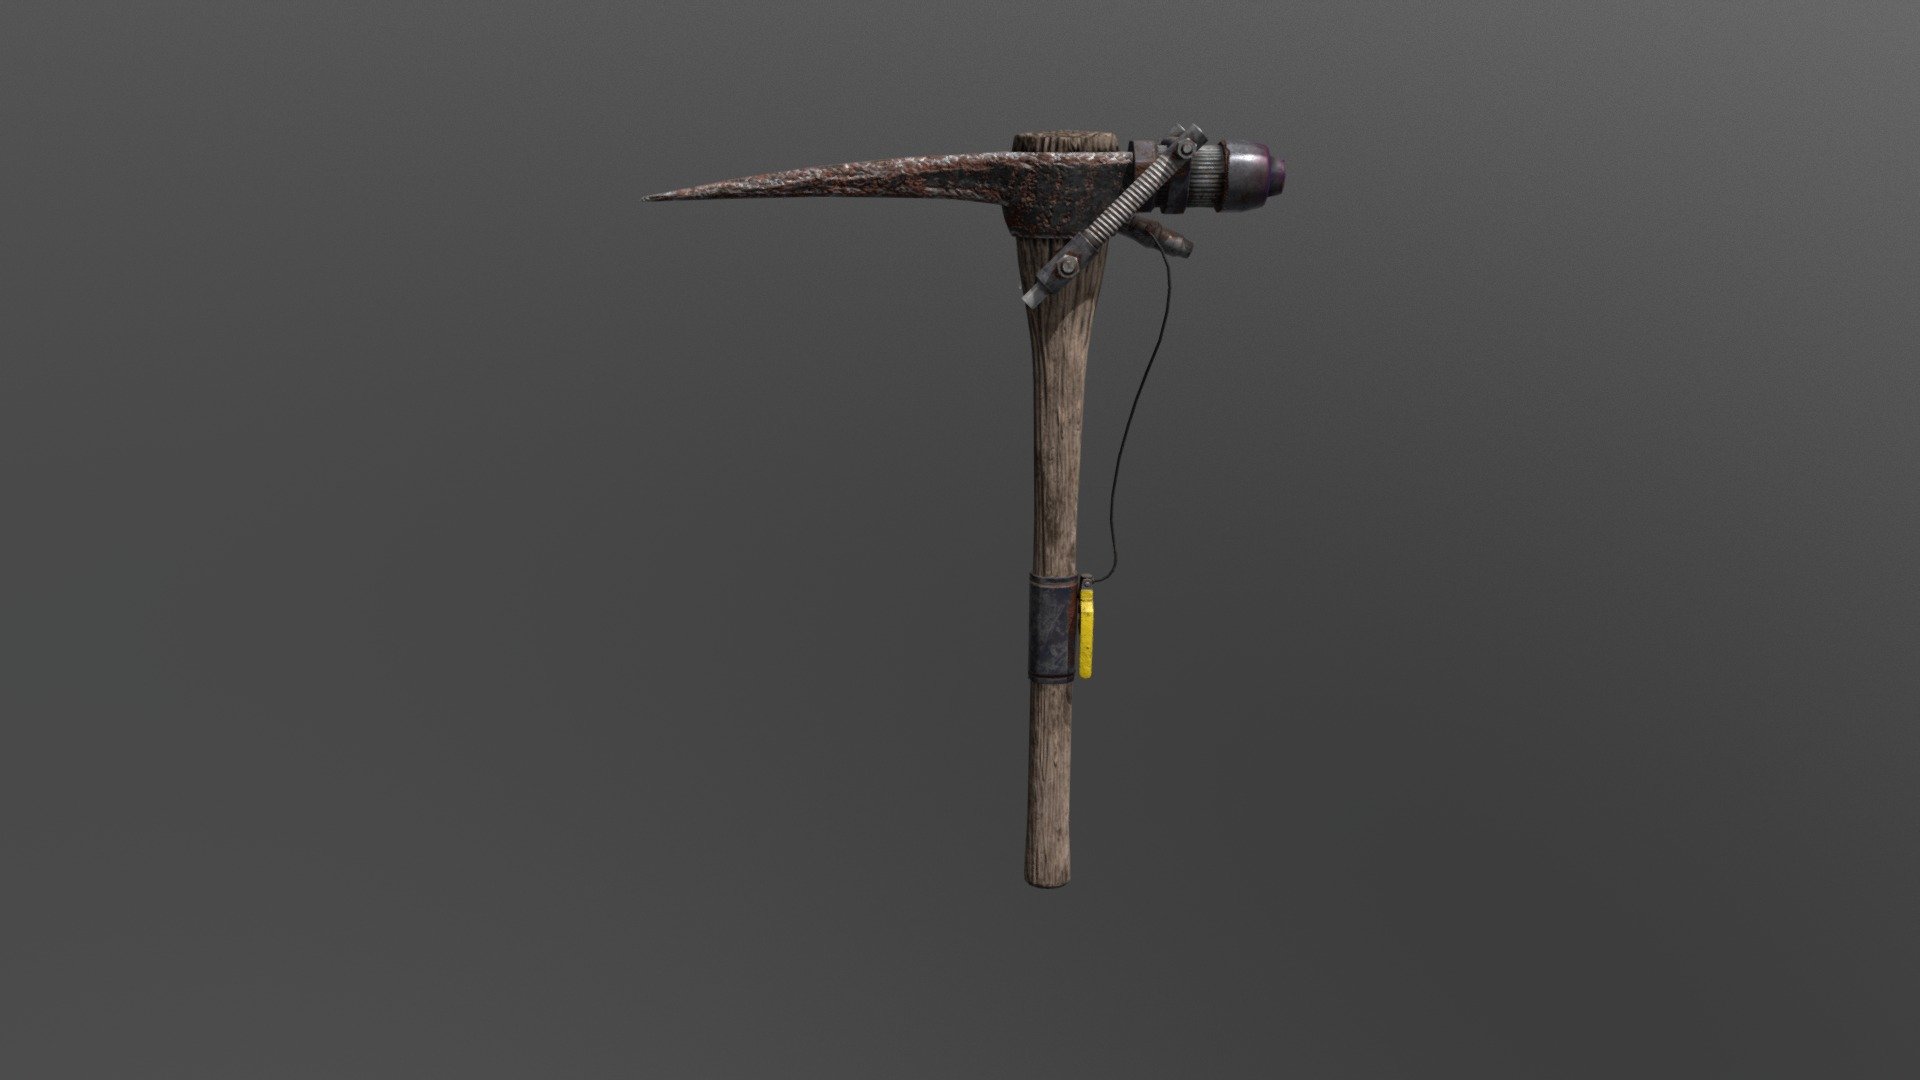 My favourite version of the Pickaxe, I've done for the Fallout 4 mod, Fallout: Cascadia. the model has numerous versions, in-keeping with the weapon modification and customization in the base Fallout 4 game. the model itself is game-ready and, pending any slight tweaks and improvements, will be included in final release for Fallout: Cascadia.

Go check out Fallout: Cascadia at:
http://www.falloutcascadia.com/ - Pickaxe Jet - 3D model by Alexander Kimberley (@alexk) 3d model